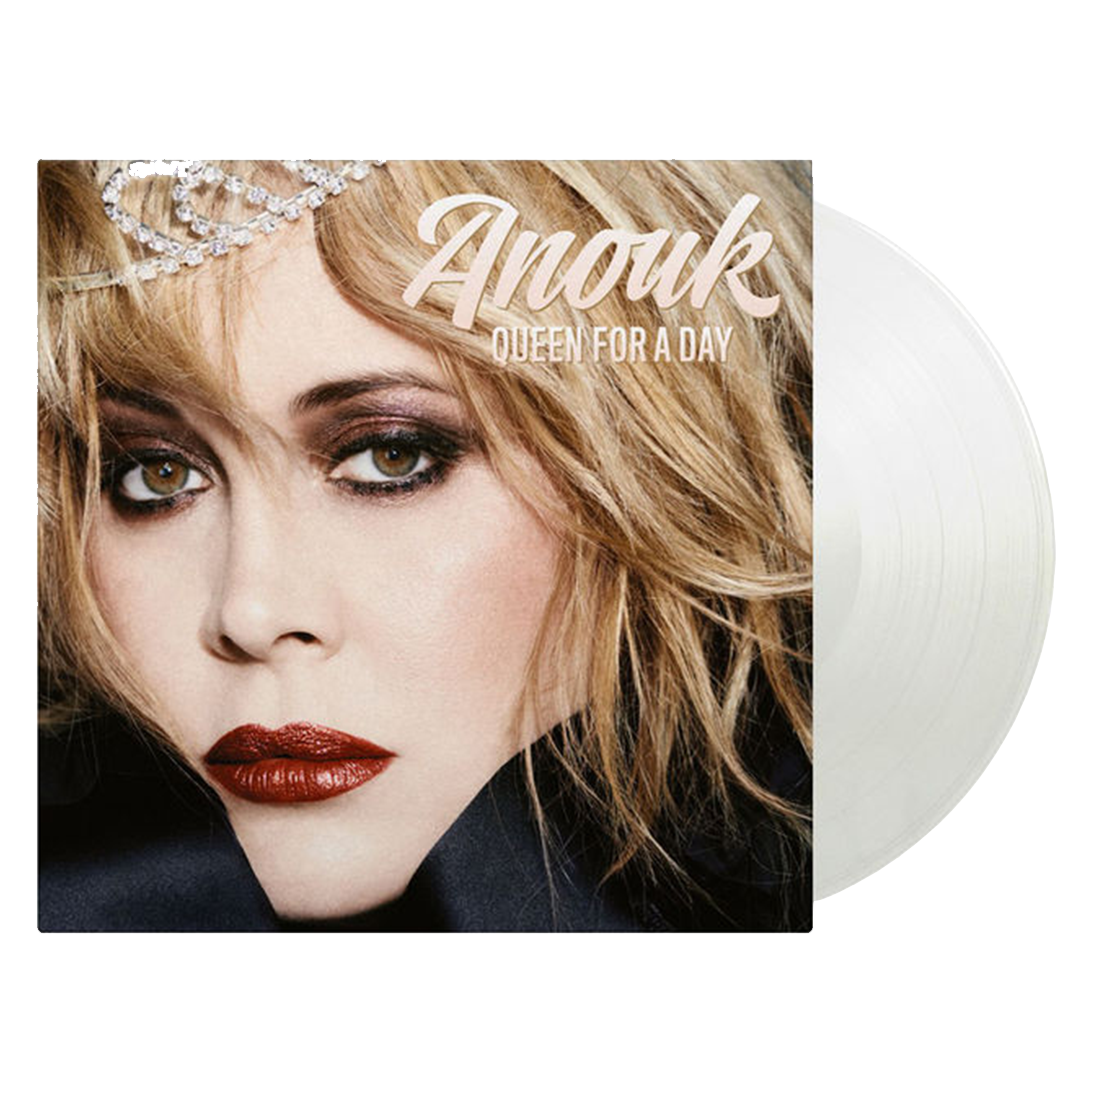 Queen For A Day: Limited Edition 180gm White Vinyl LP